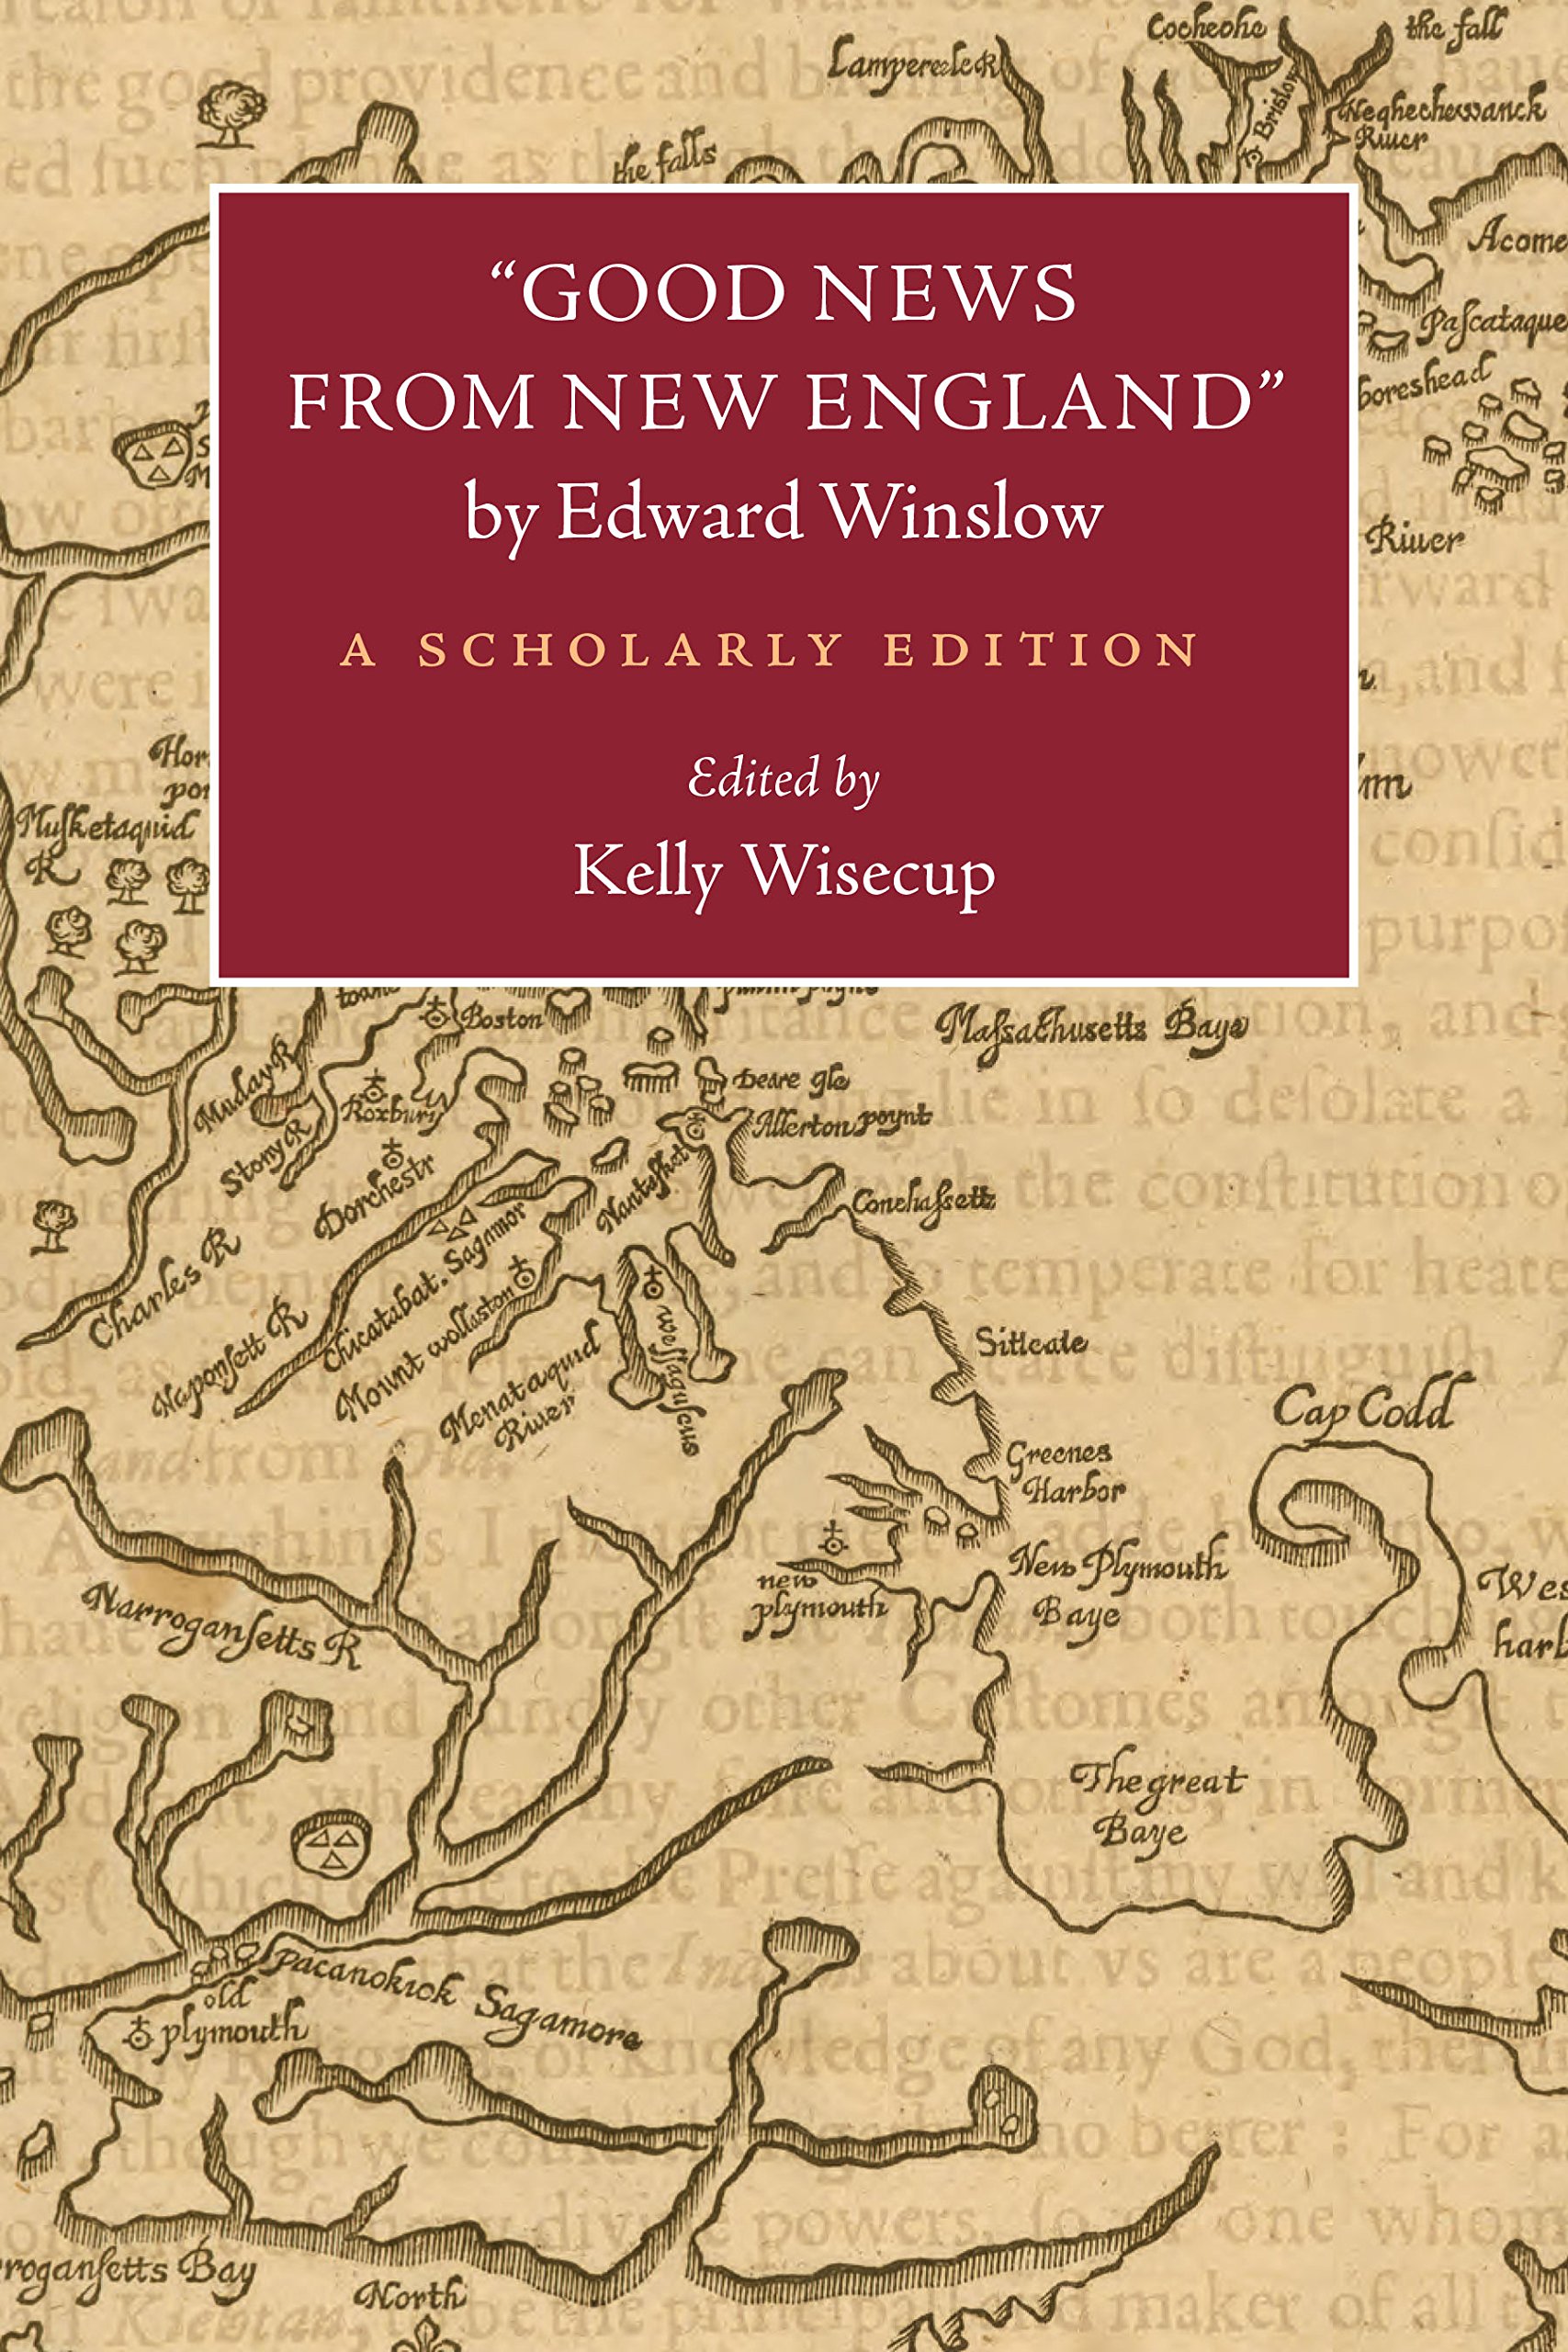 “Good News from New England” by Edward Winslow: A Scholarly Edition